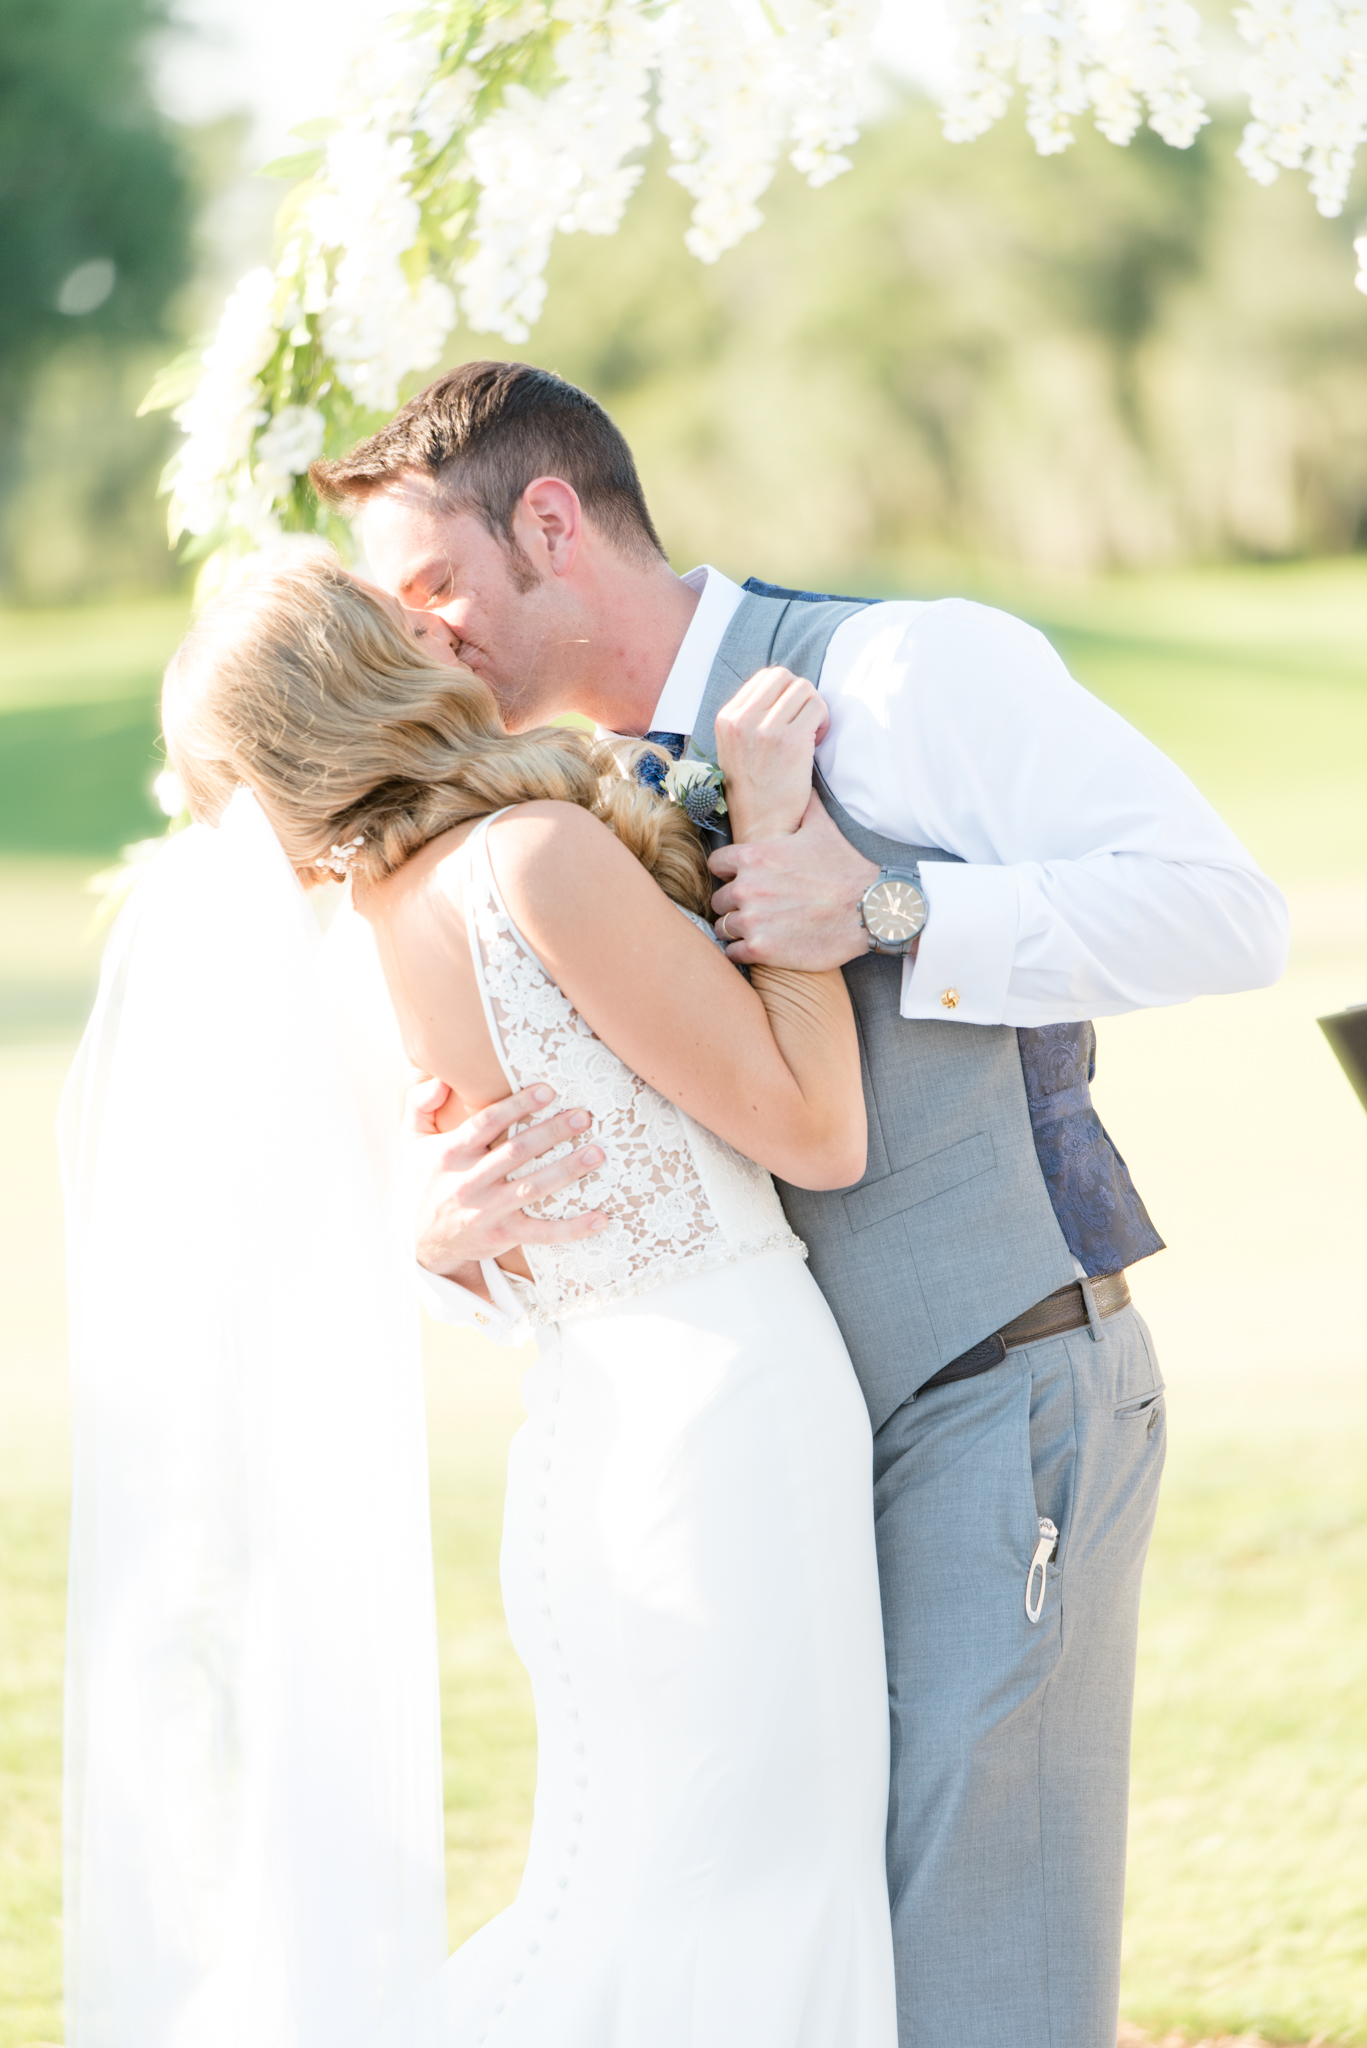 Bride and groom kiss during May wedding ceremony.